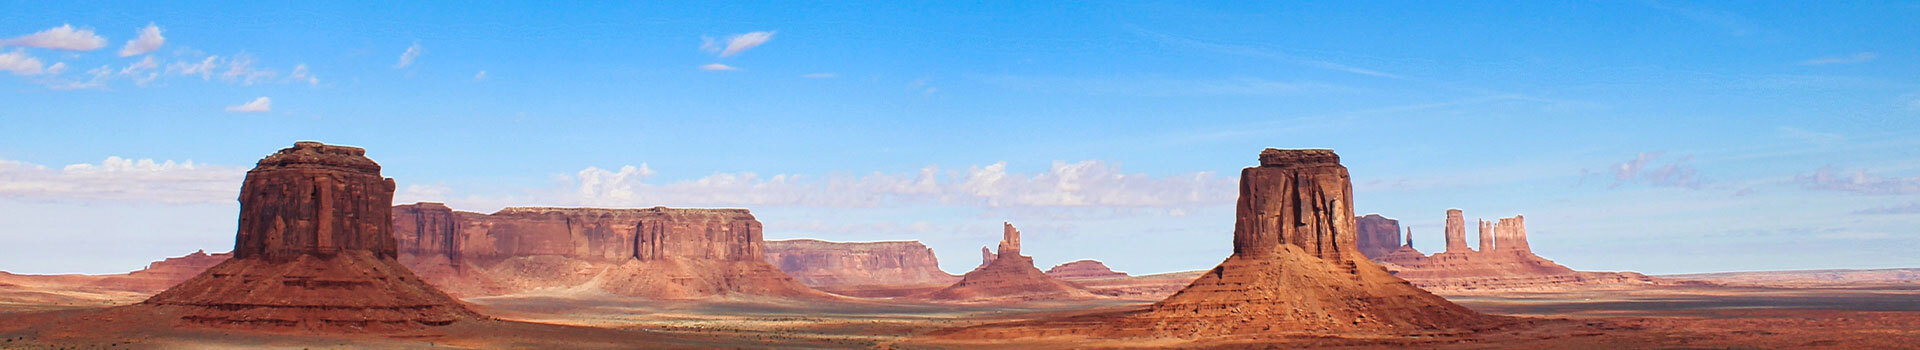 Voyage A Monument Valley